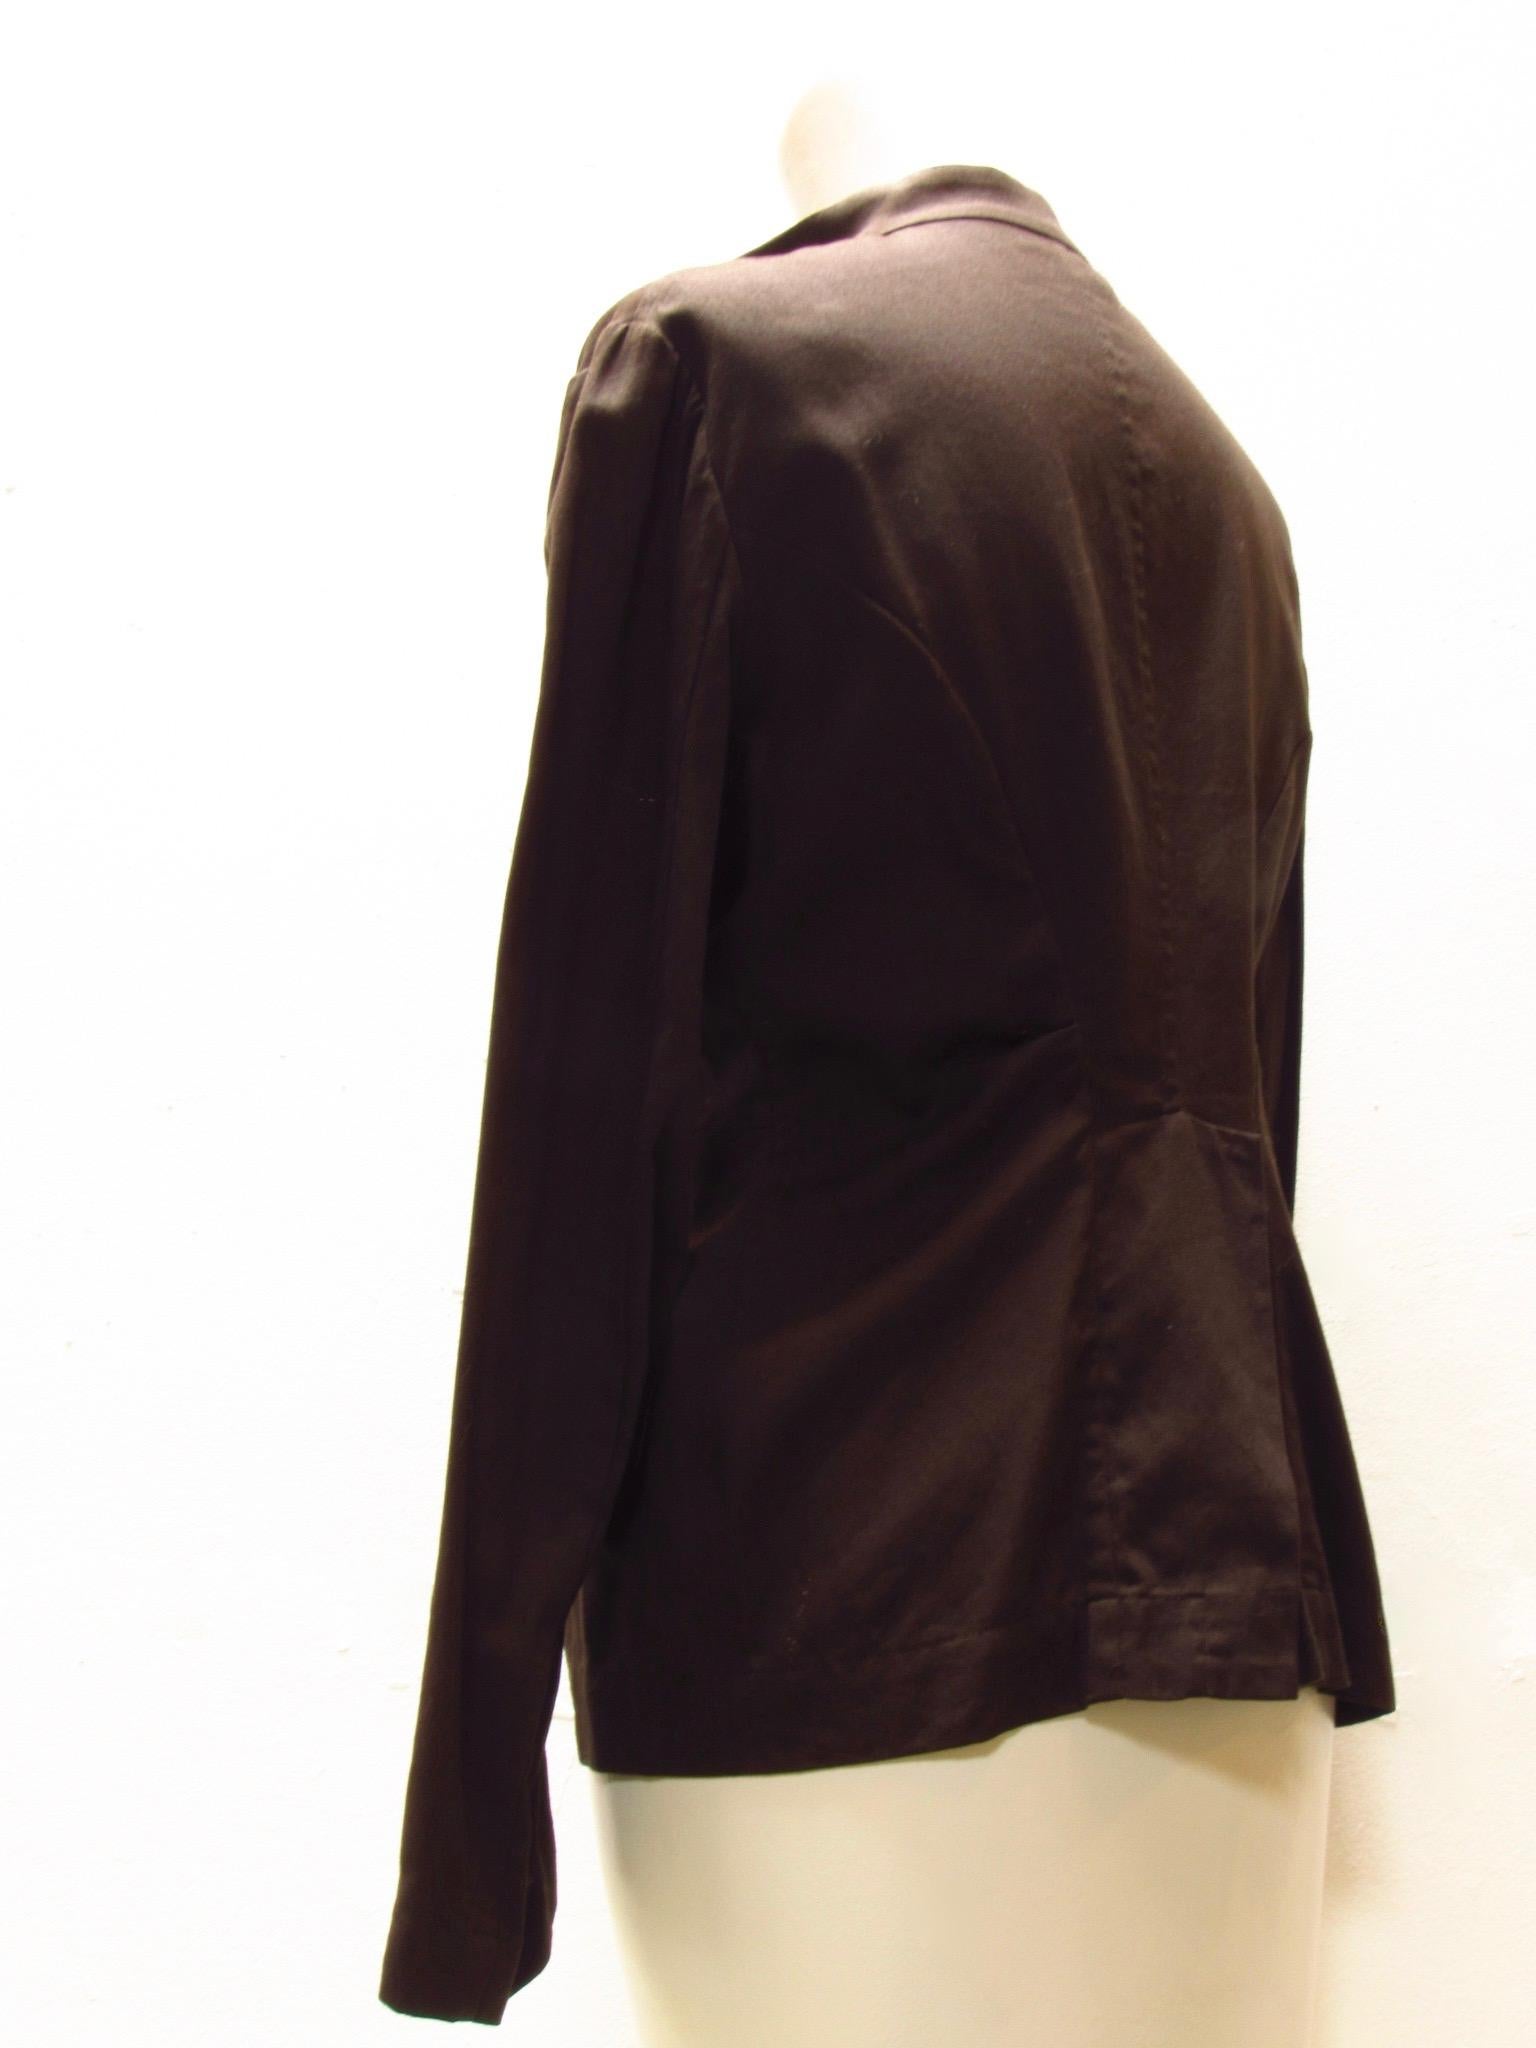 Y's Yohji Yamamoto Short Brown Lace Up Jacket In New Condition For Sale In Laguna Beach, CA